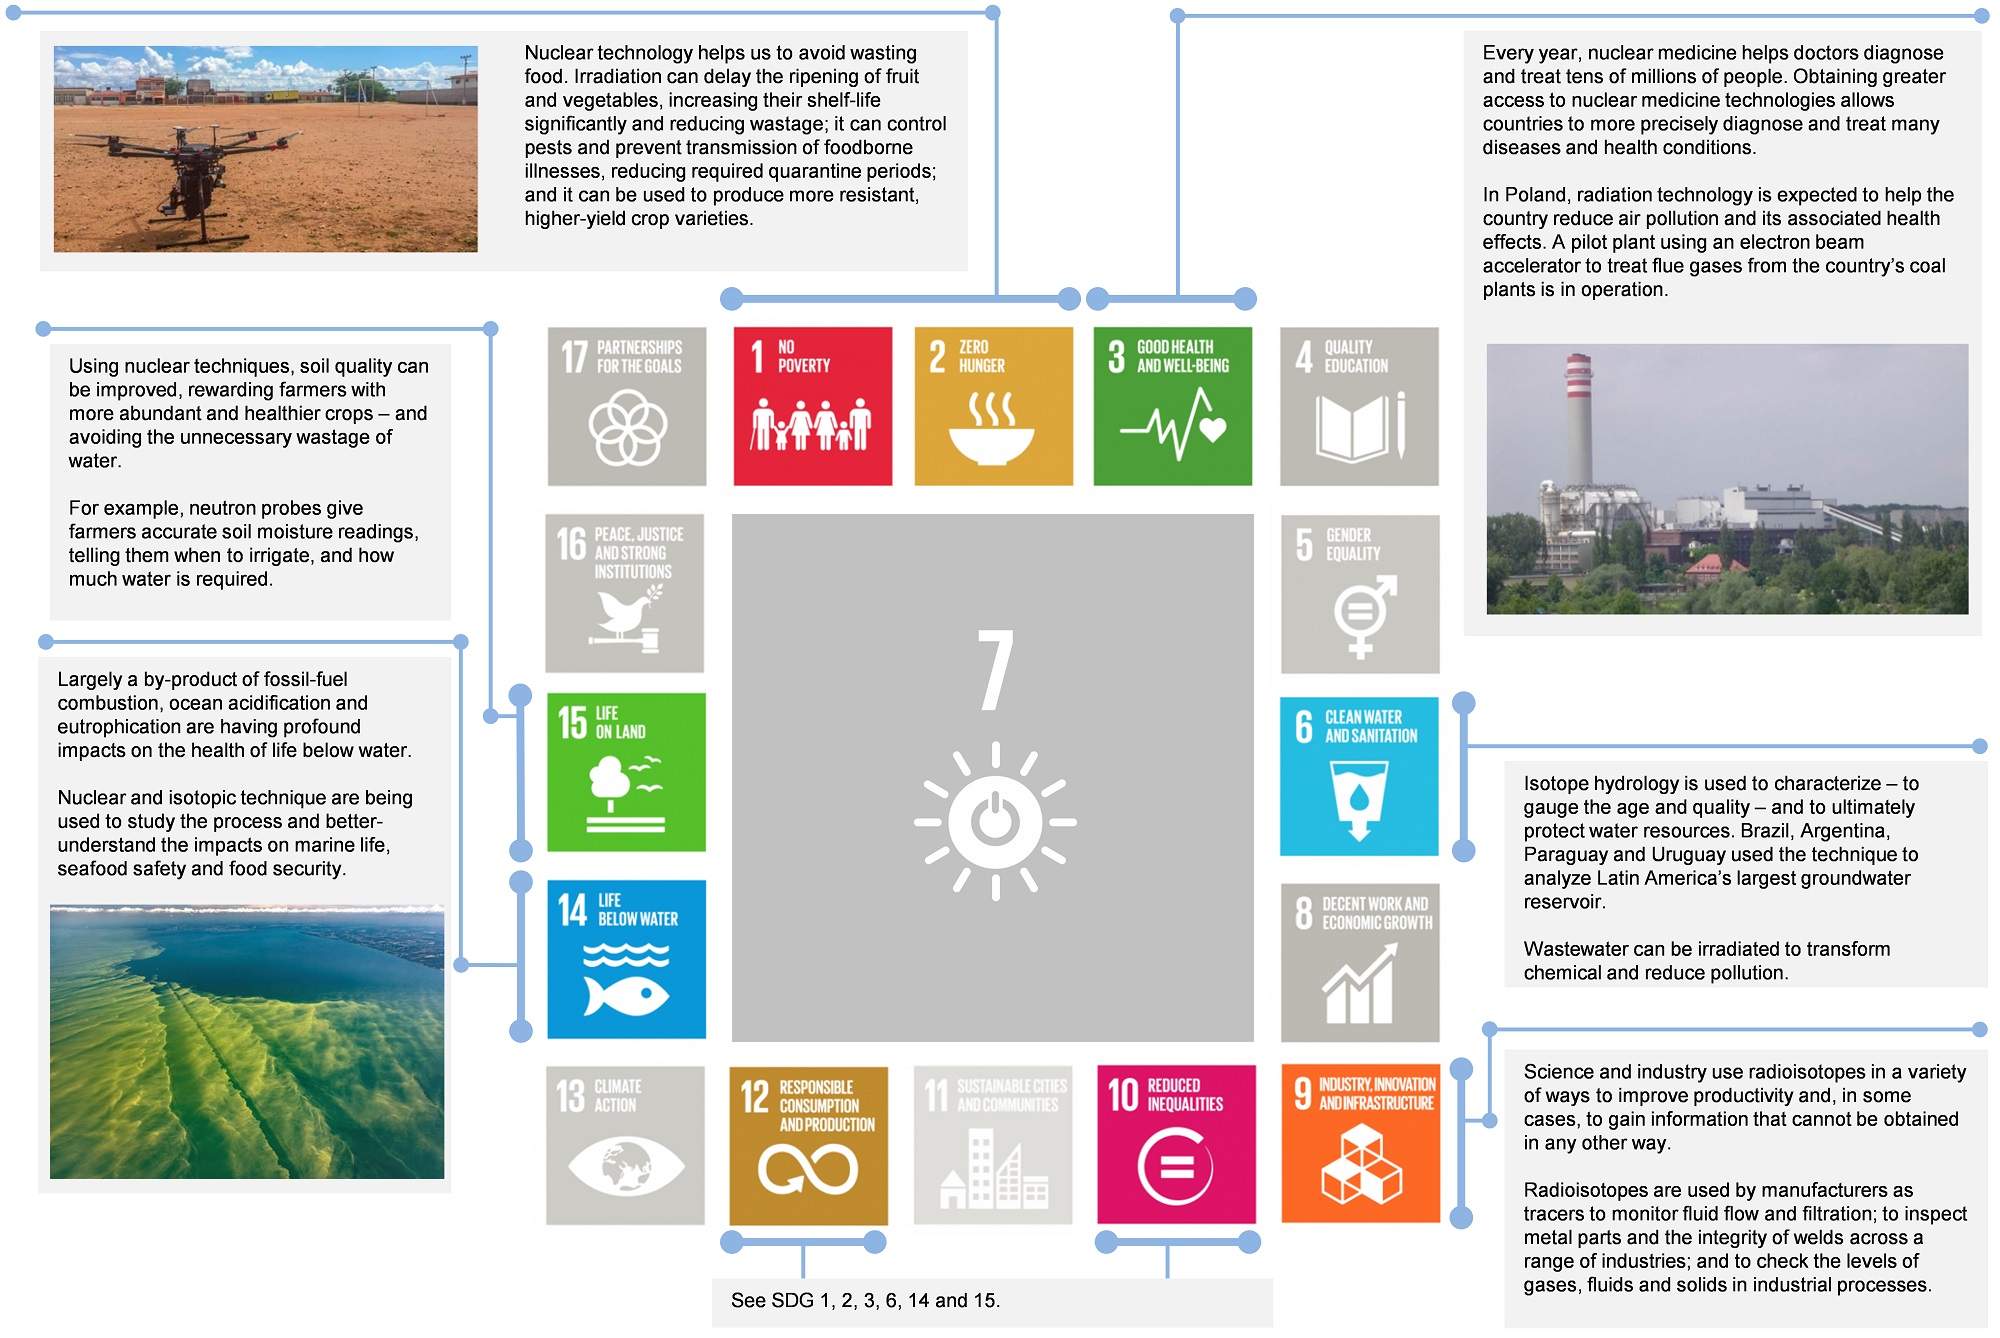 Examples of the contribution of non-power nuclear technologies to the SDGs